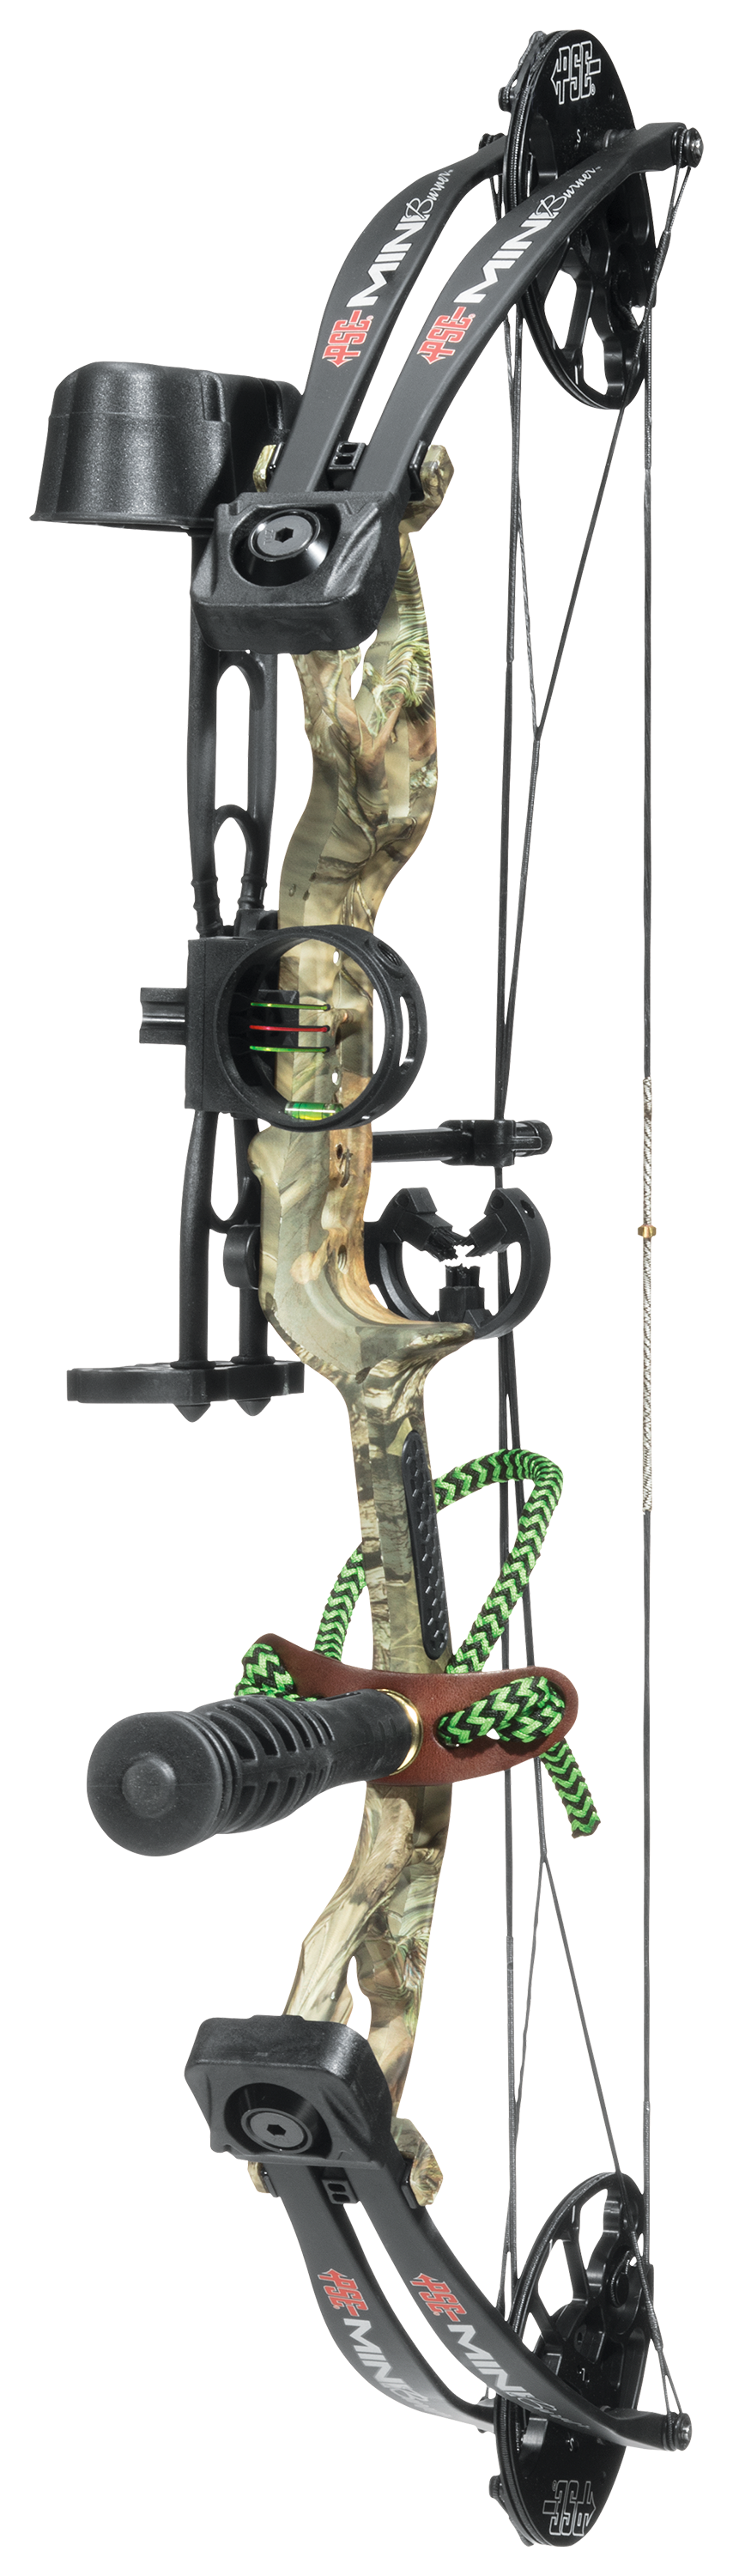 PSE Archery Mini Burner RTS Compound Bow Package - Mossy Oak Break-Up Country